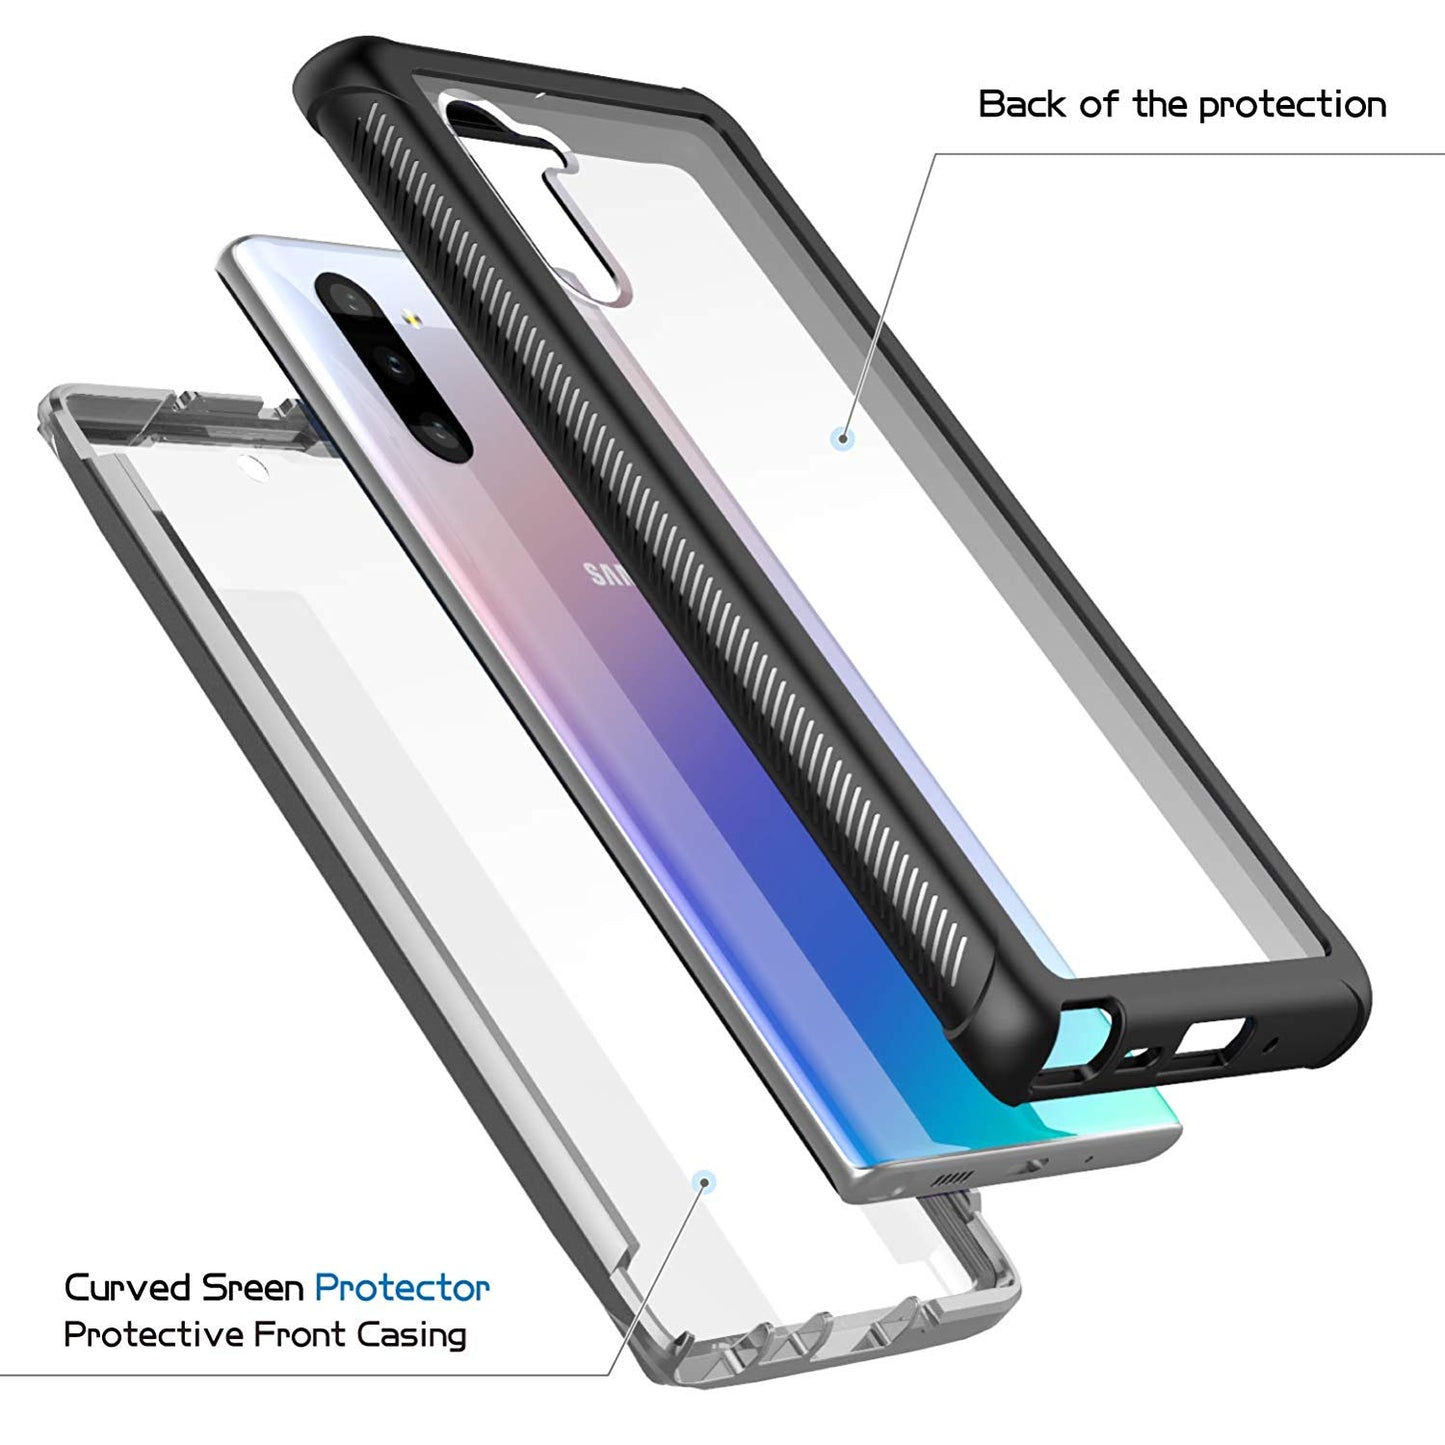 Oaktree Samsung Galaxy Note 10 Full-body Protective Clear Case with Built-in Screen Protector